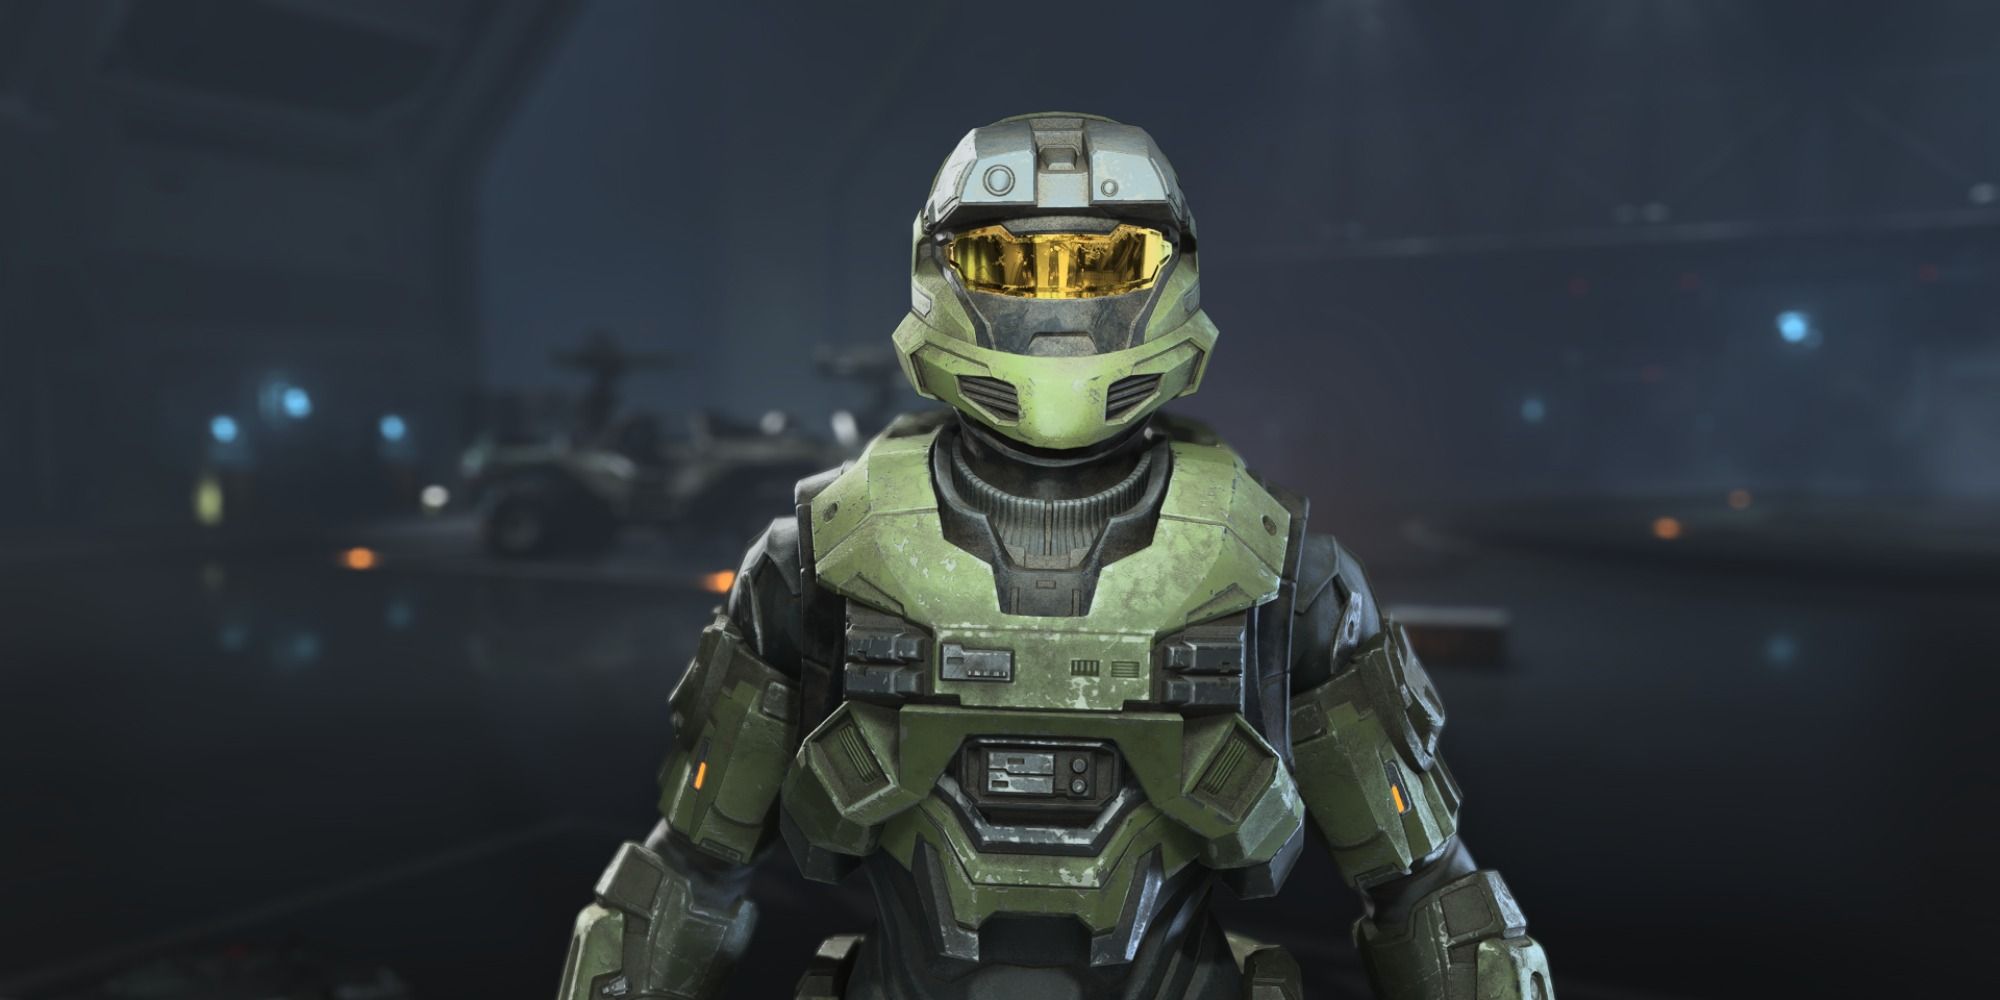 The Scout Helmet in Halo Infinite